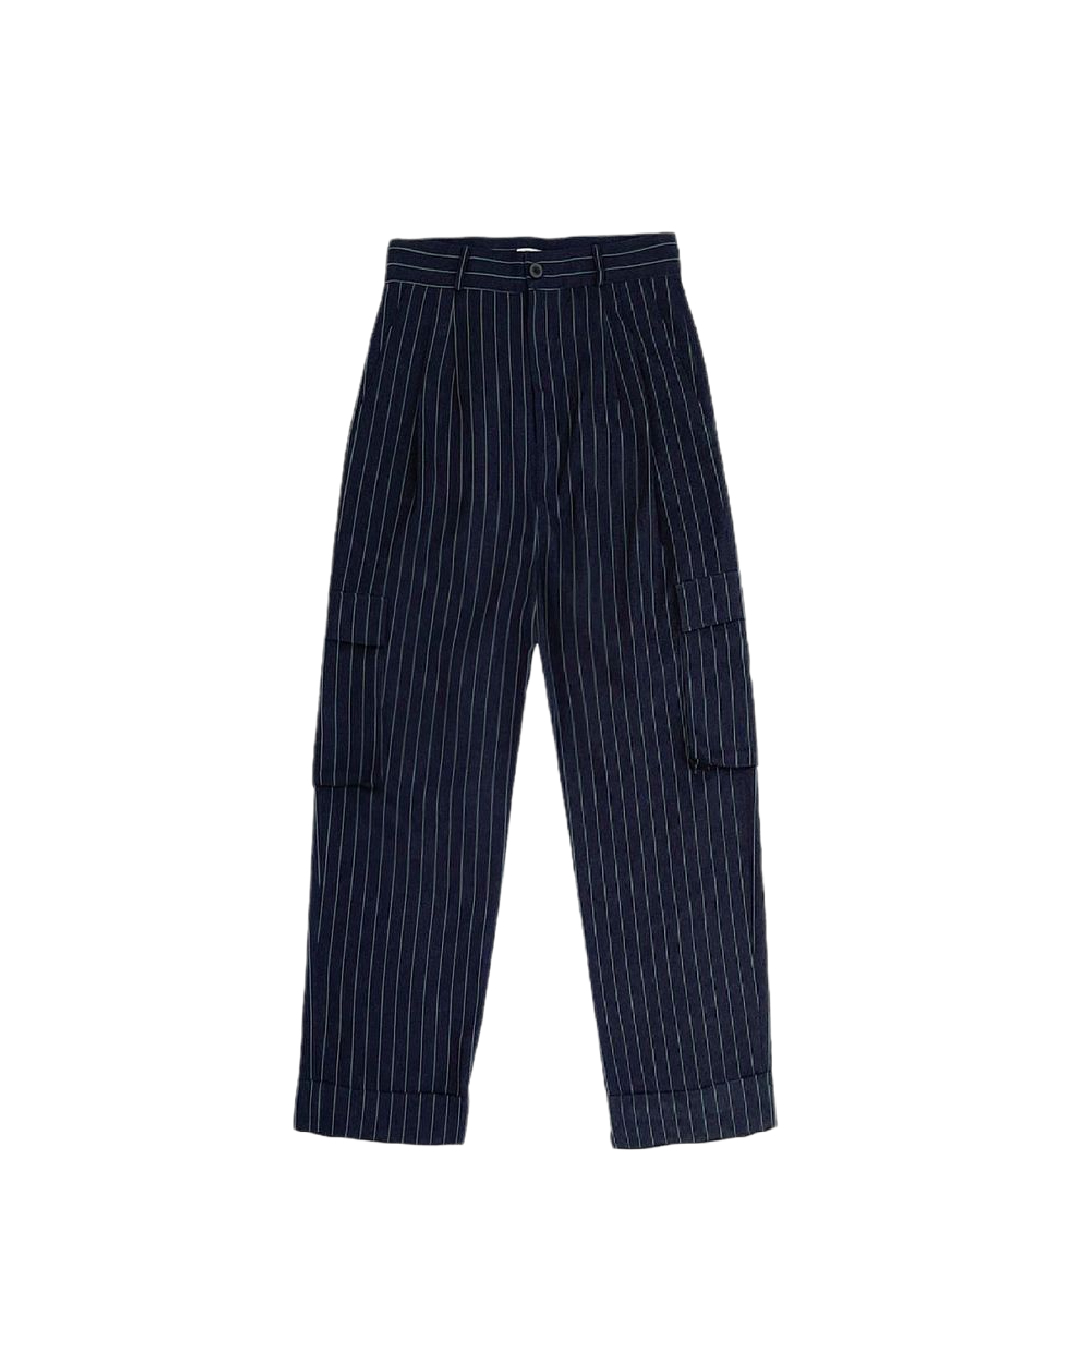 Casual Striped Pants (Navy Striped)